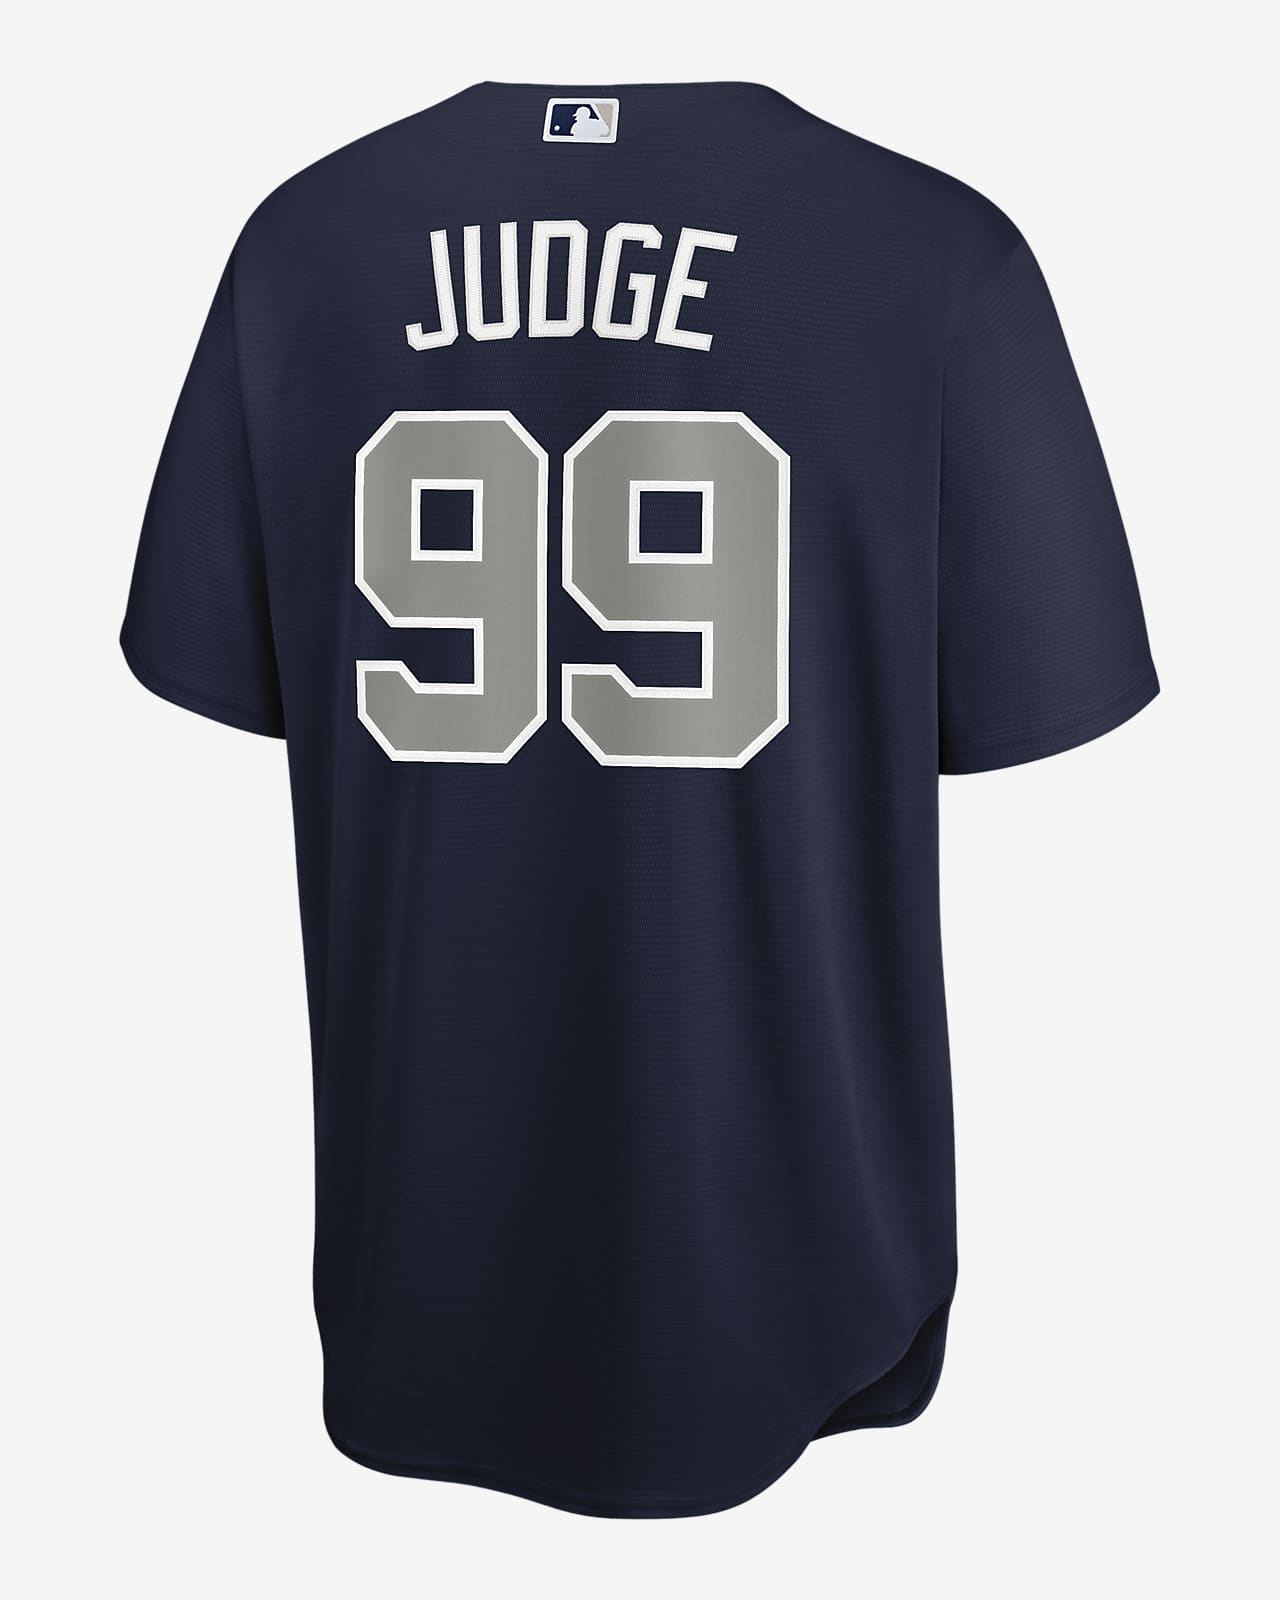 New York Yankees Aaron Judge Jersey Size Large for Sale in